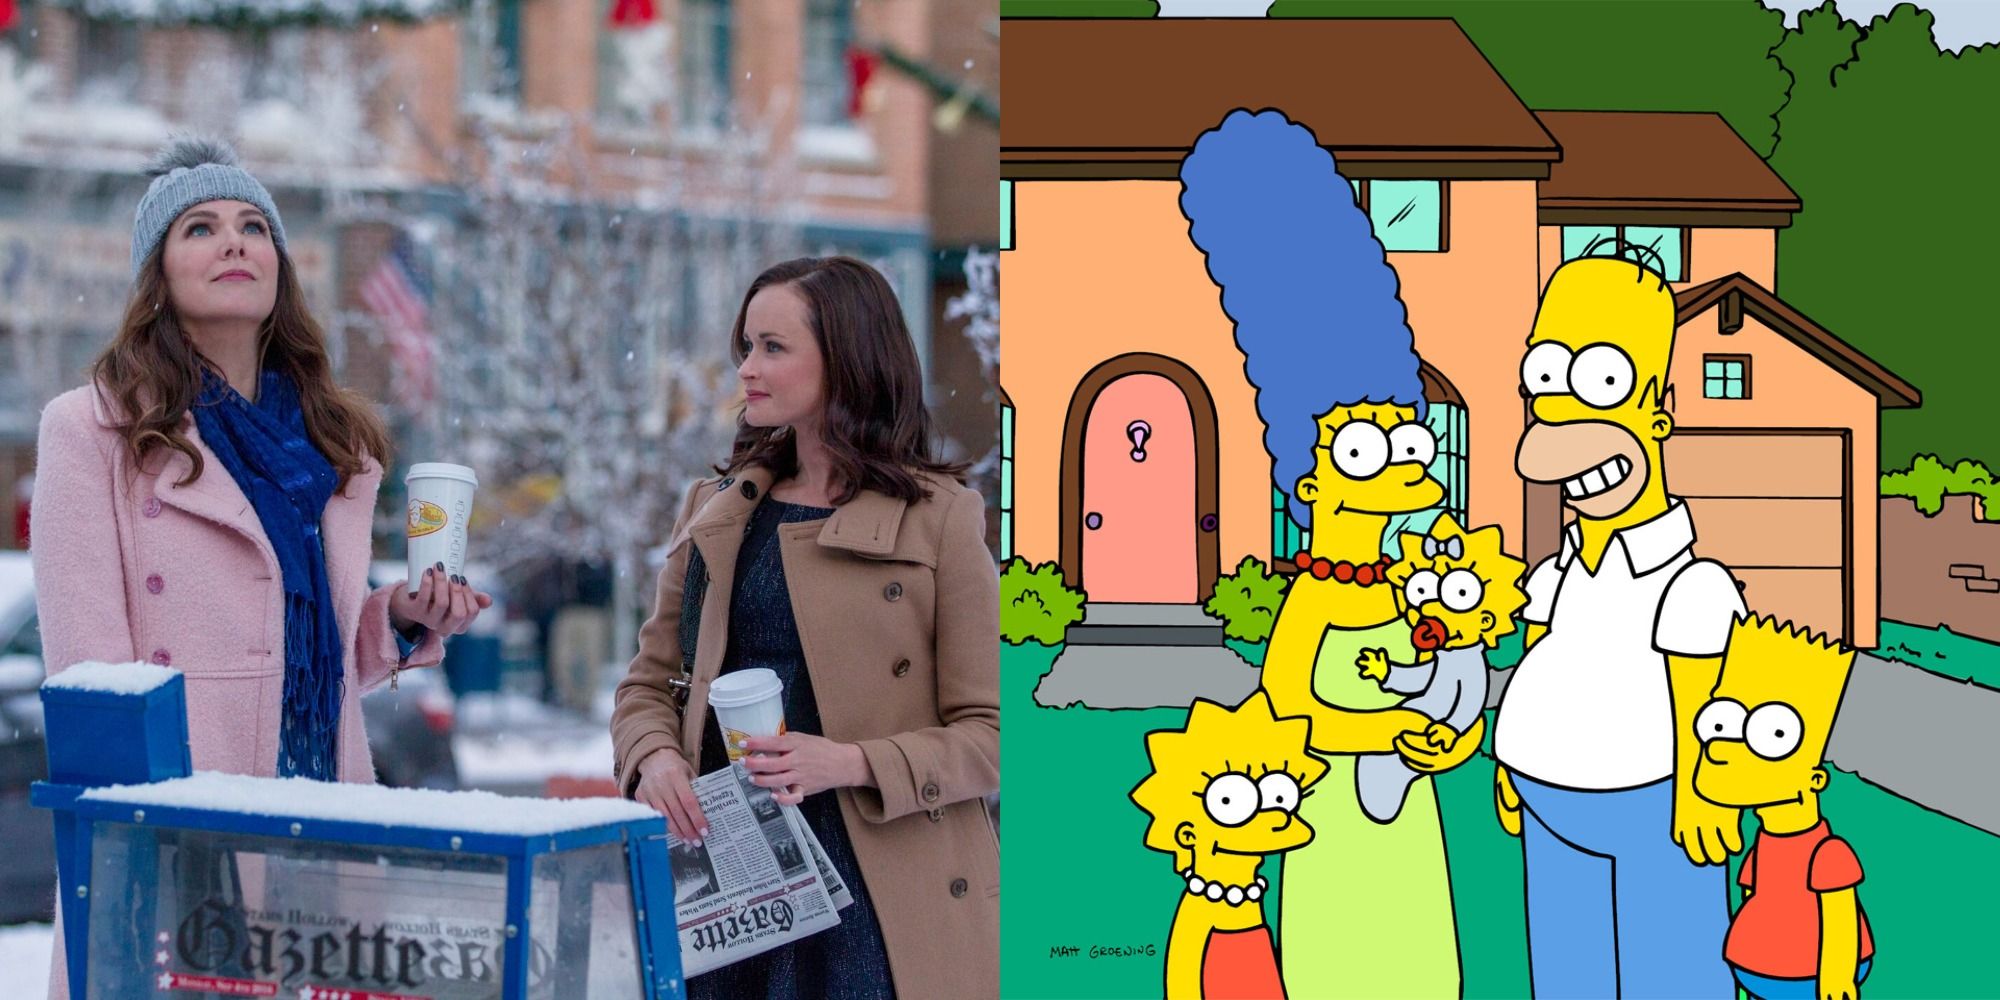 Split image showing Lorelai and Rory in Gilmore Girls and the Simpson family